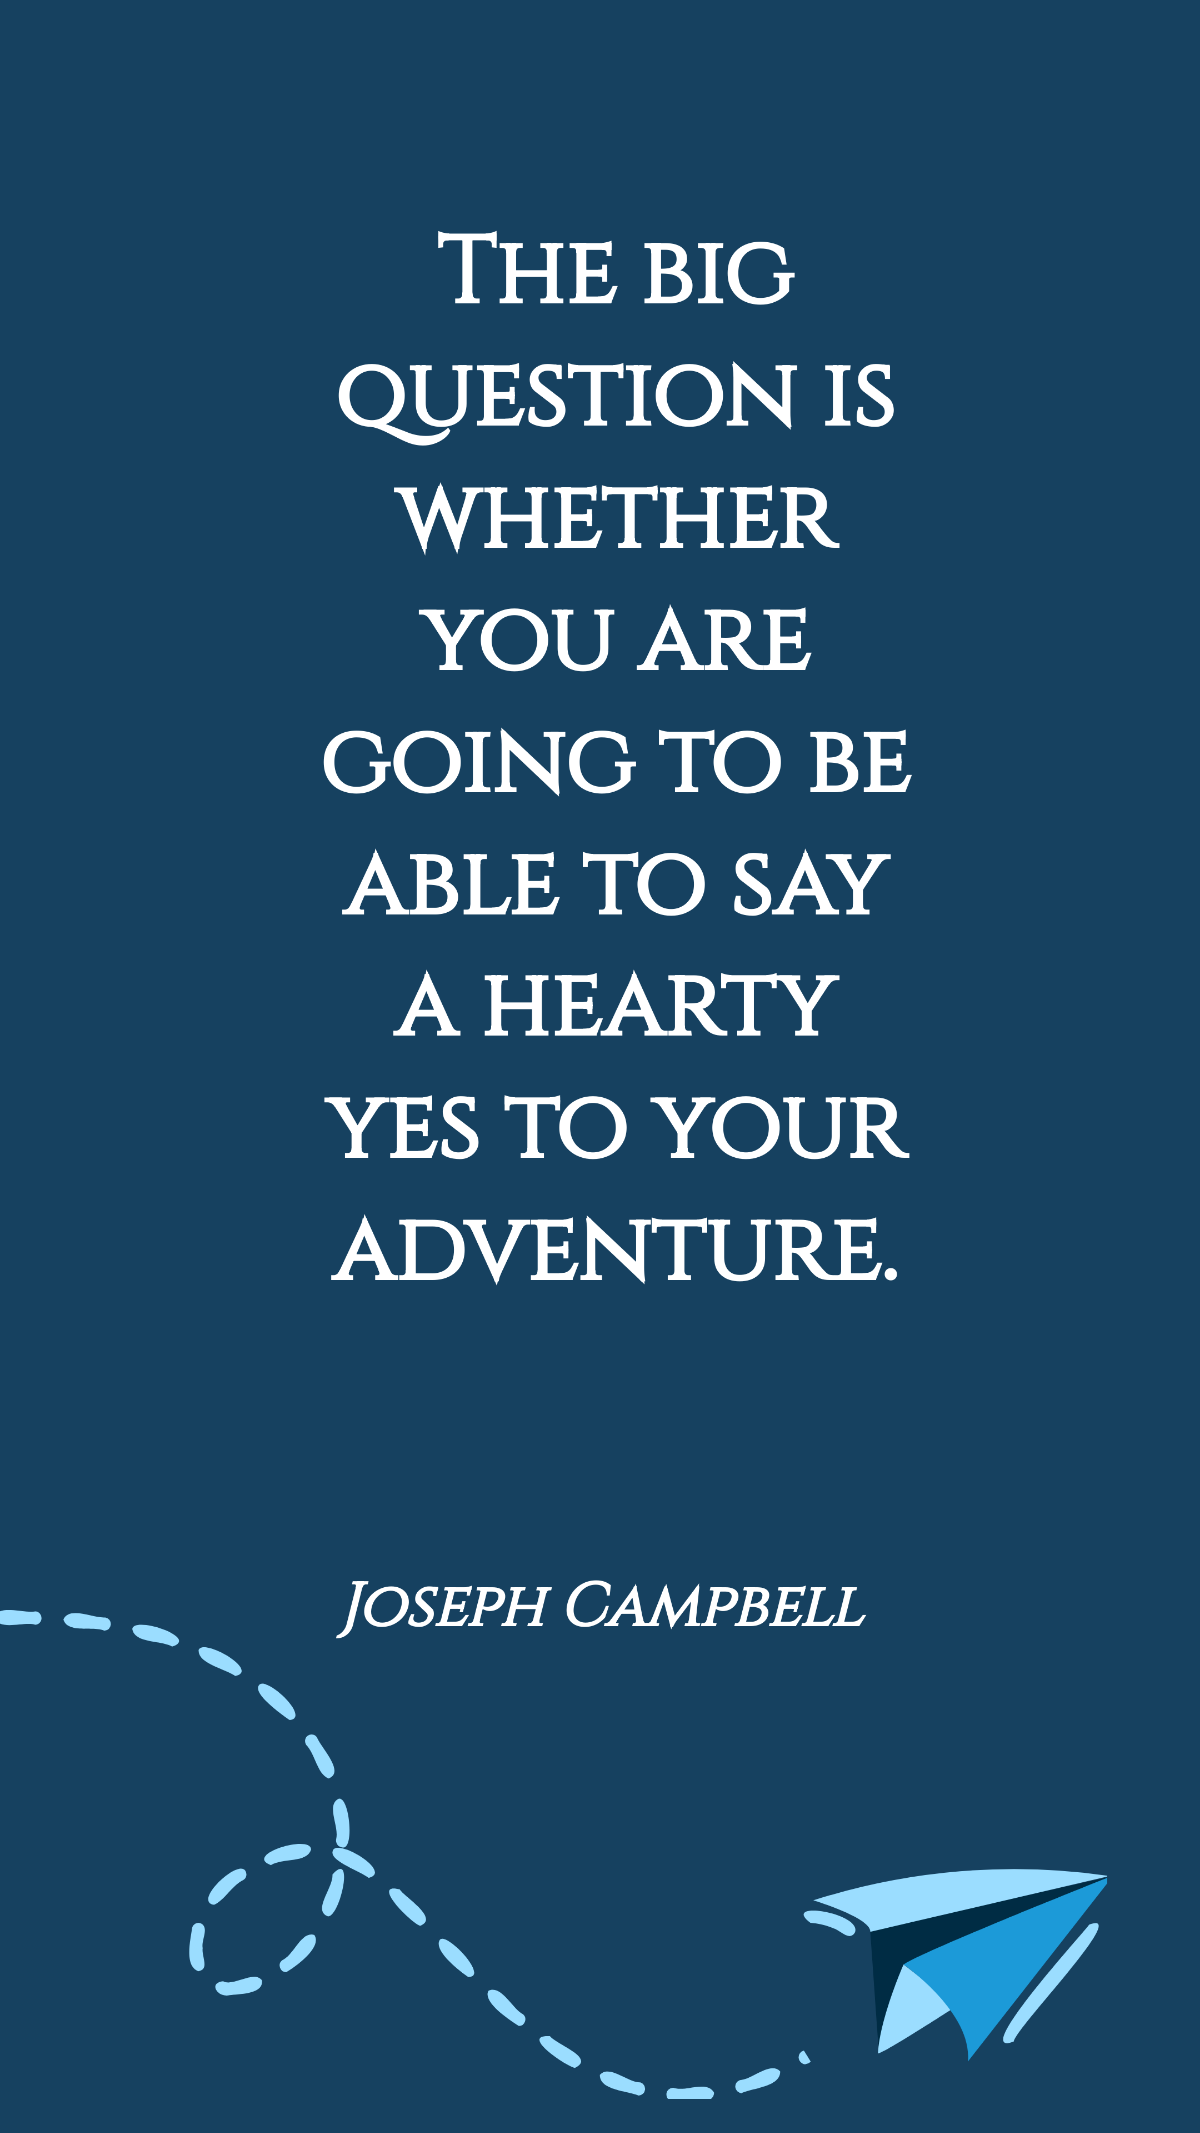 Free Joseph Campbell - The big question is whether you are going to be able to say a hearty yes to your adventure. Template